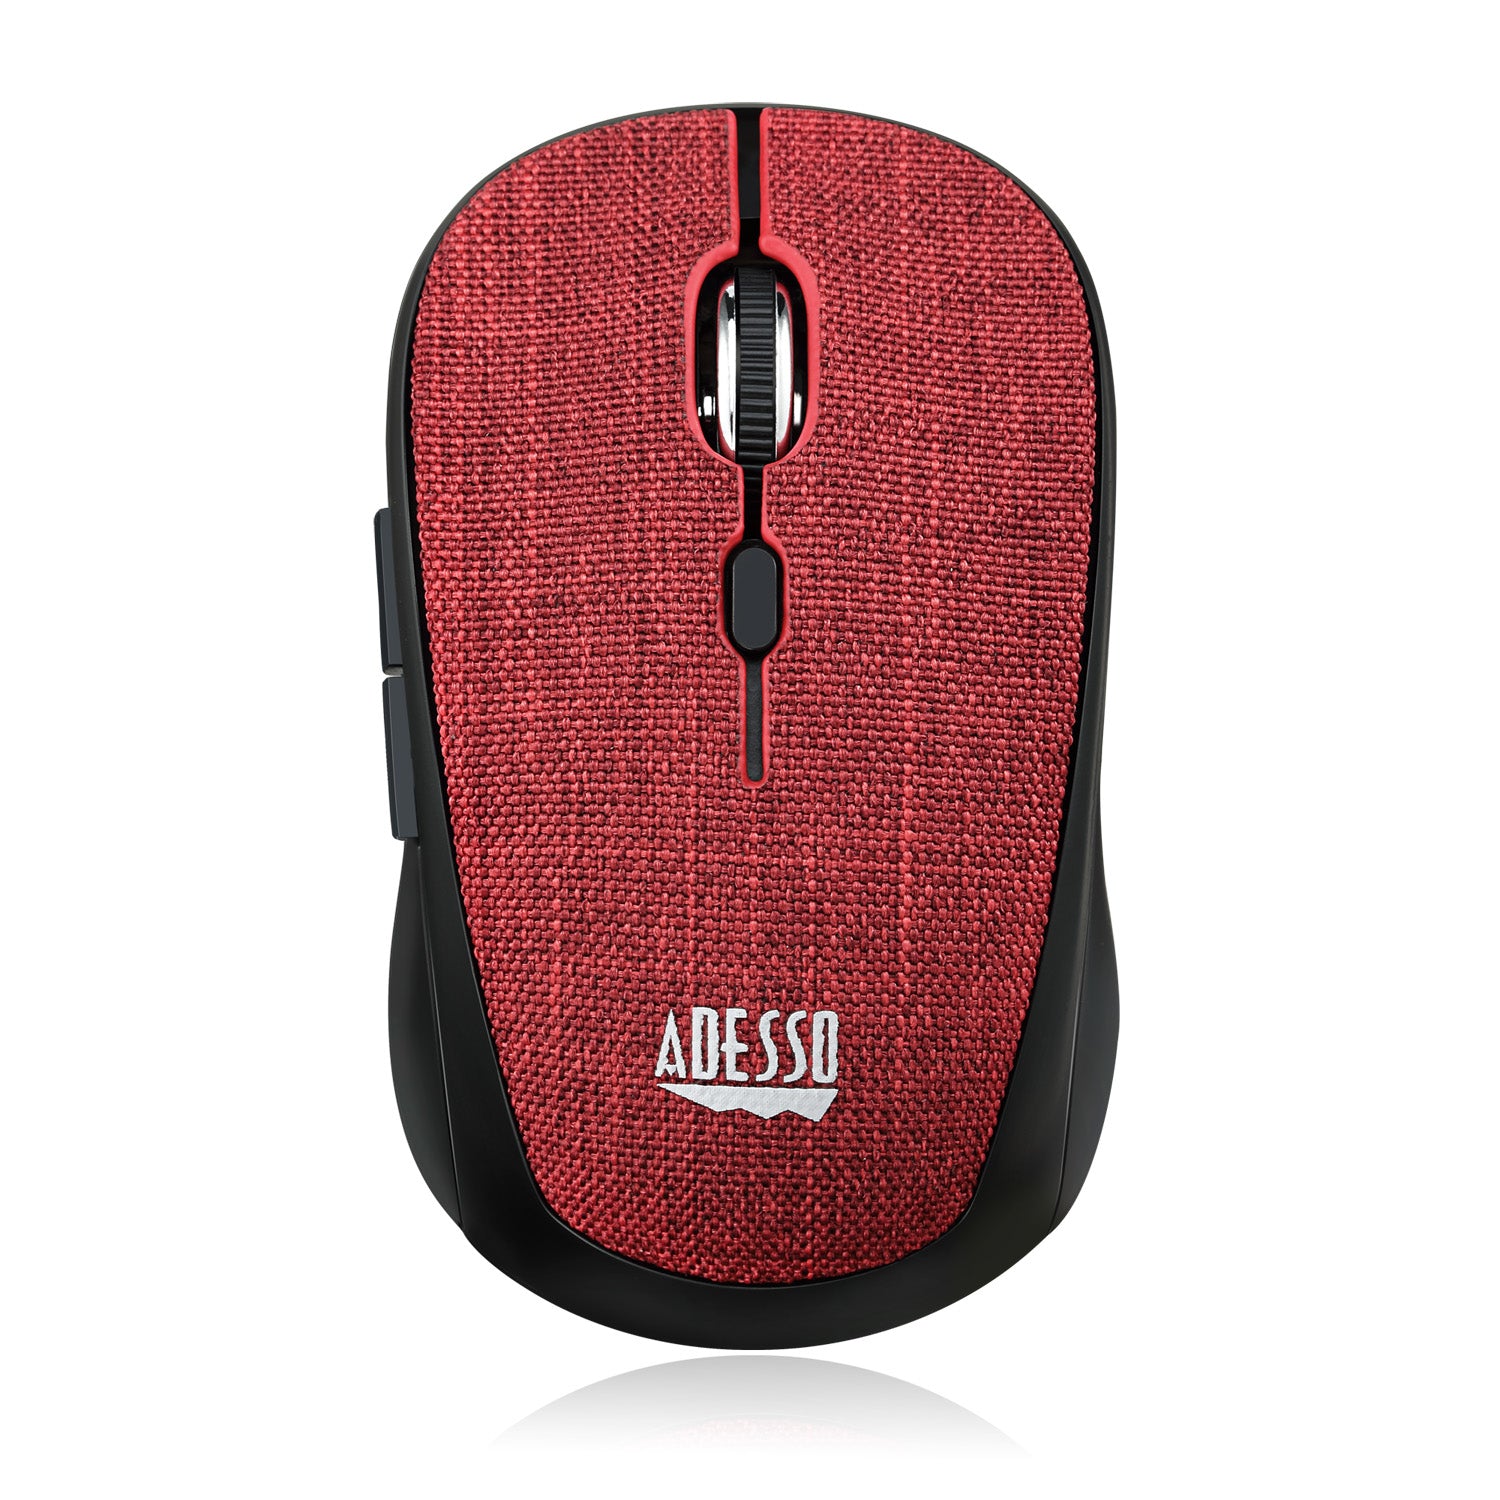 Adesso iMouse S80R mouse Office Ambidextrous RF Wireless Optical 1600 DPI